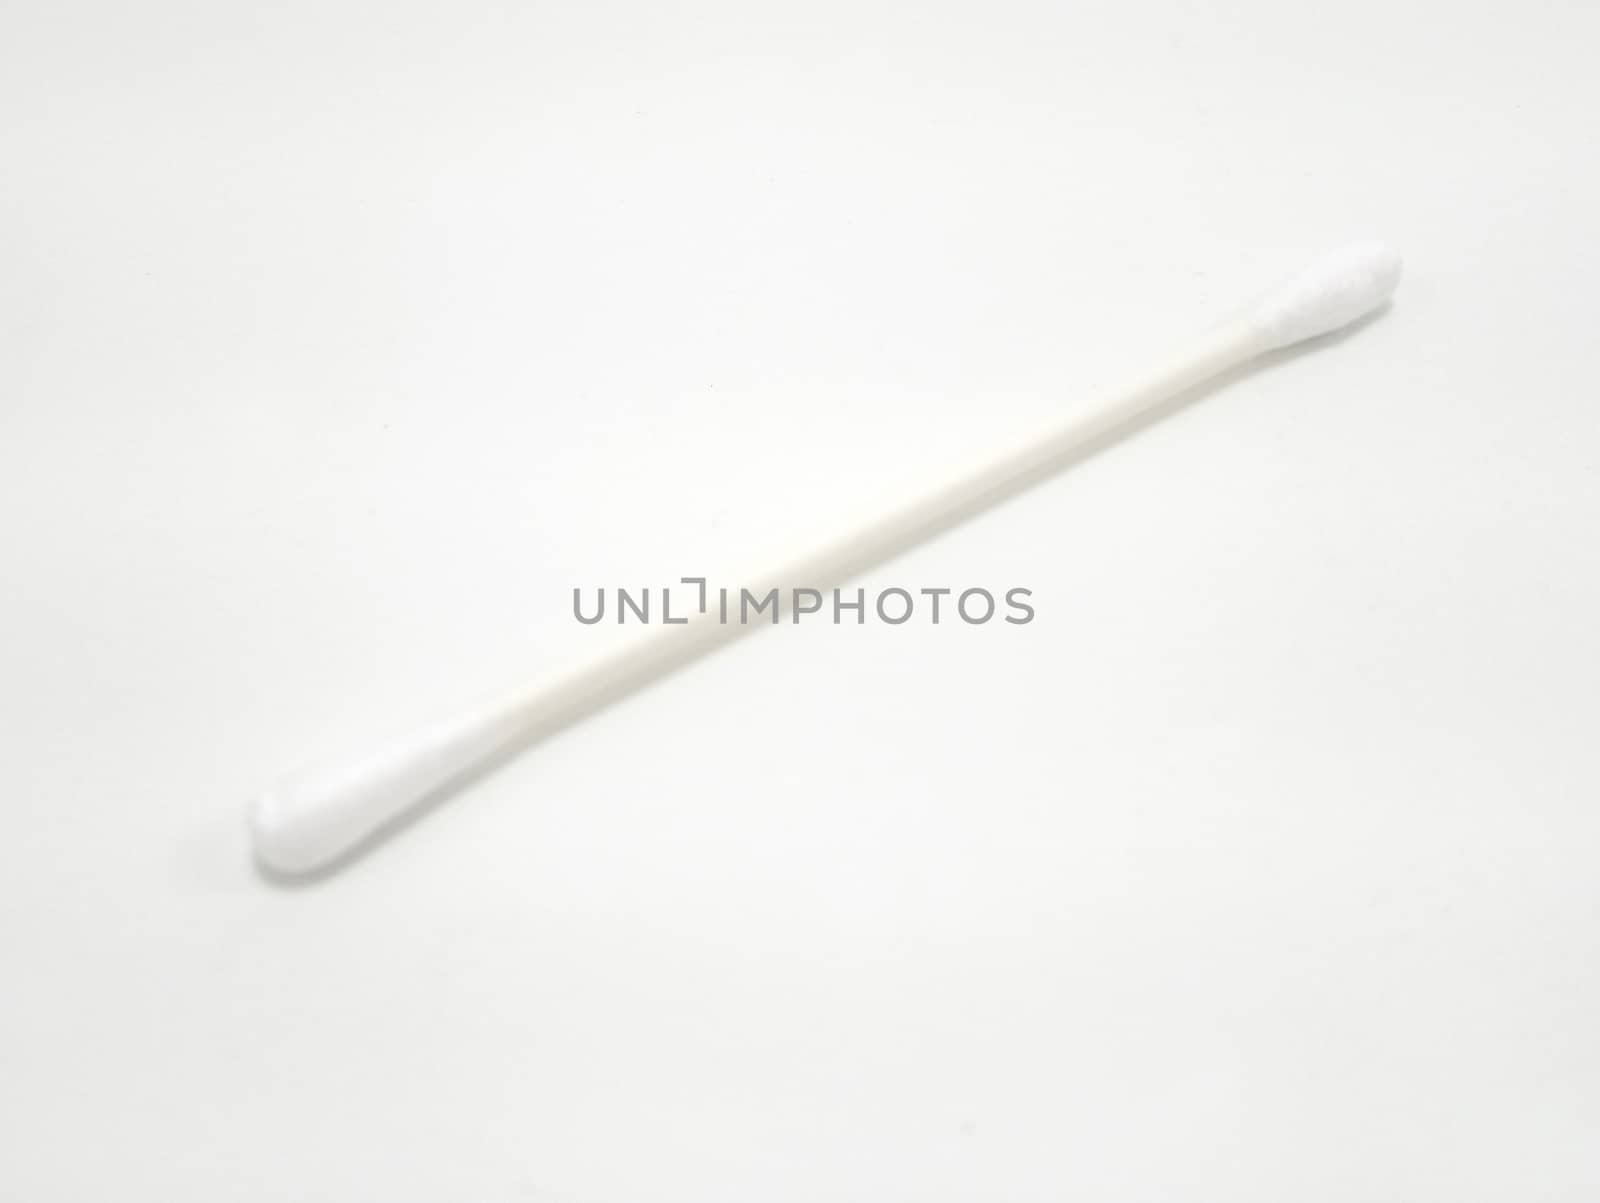 Cotton buds at both ends of the plastic stick by imwaltersy